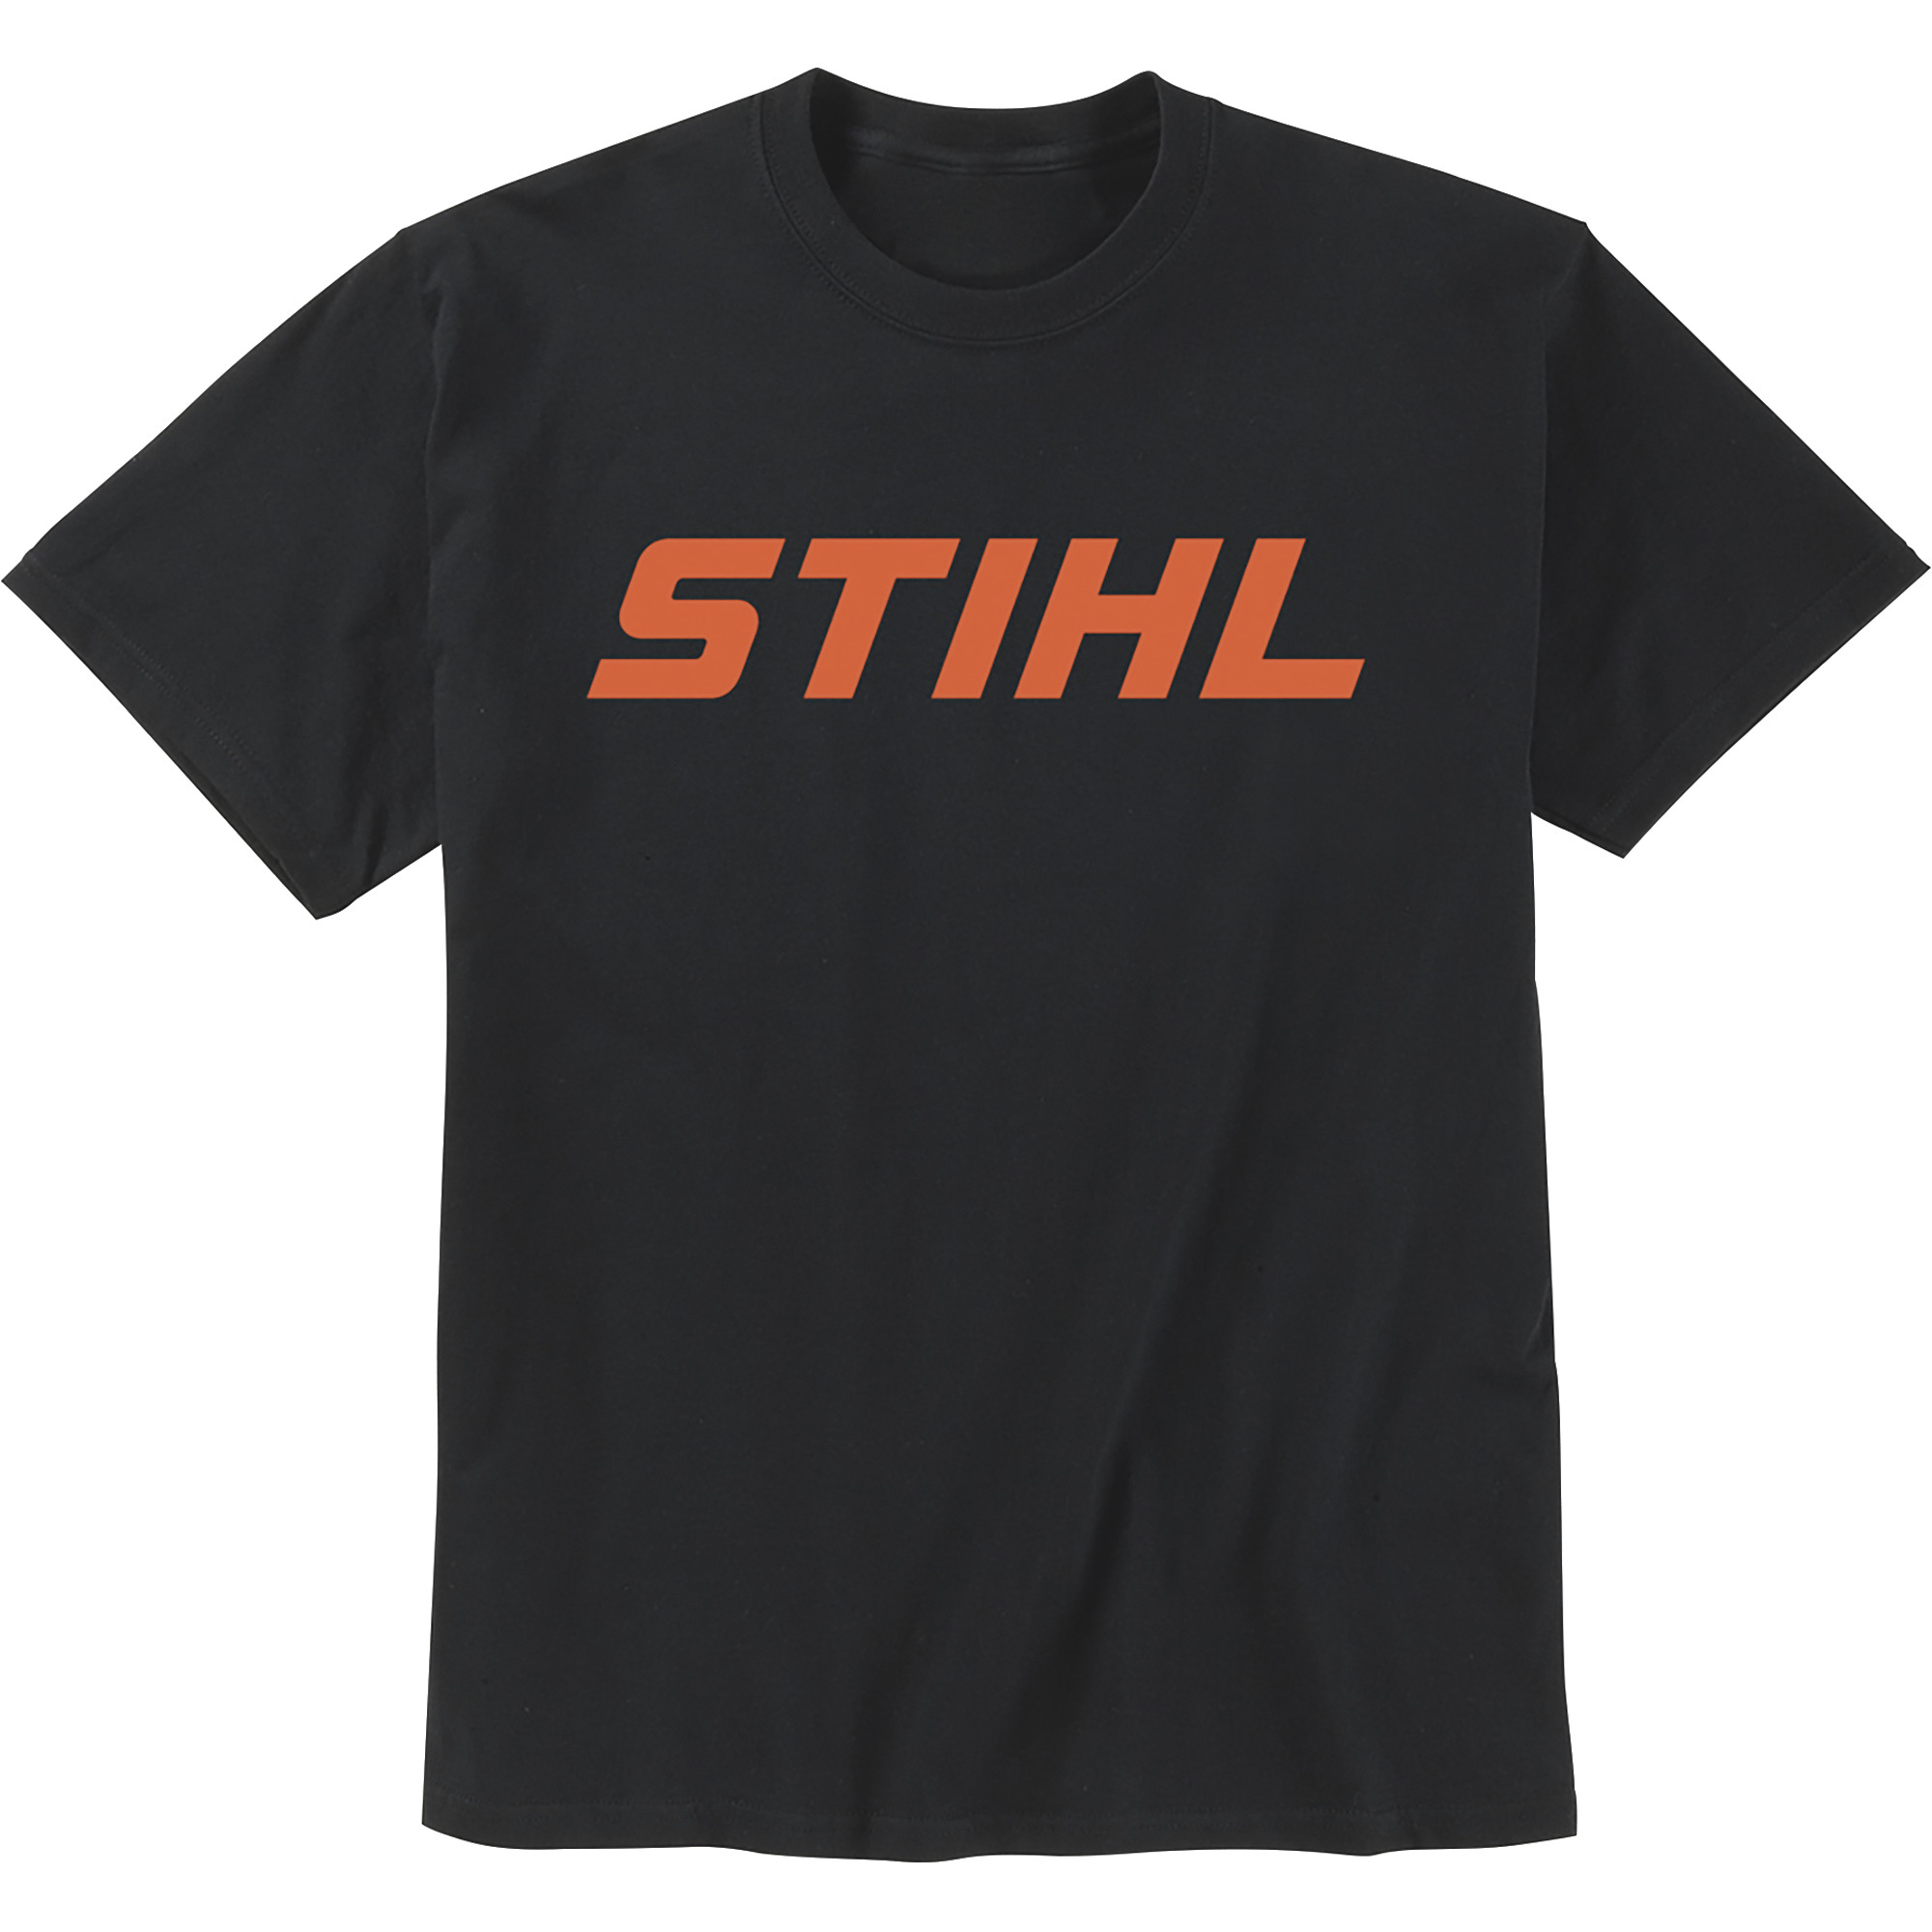 STIHL Outfitters Trademark T-Shirt â Black, 2XL